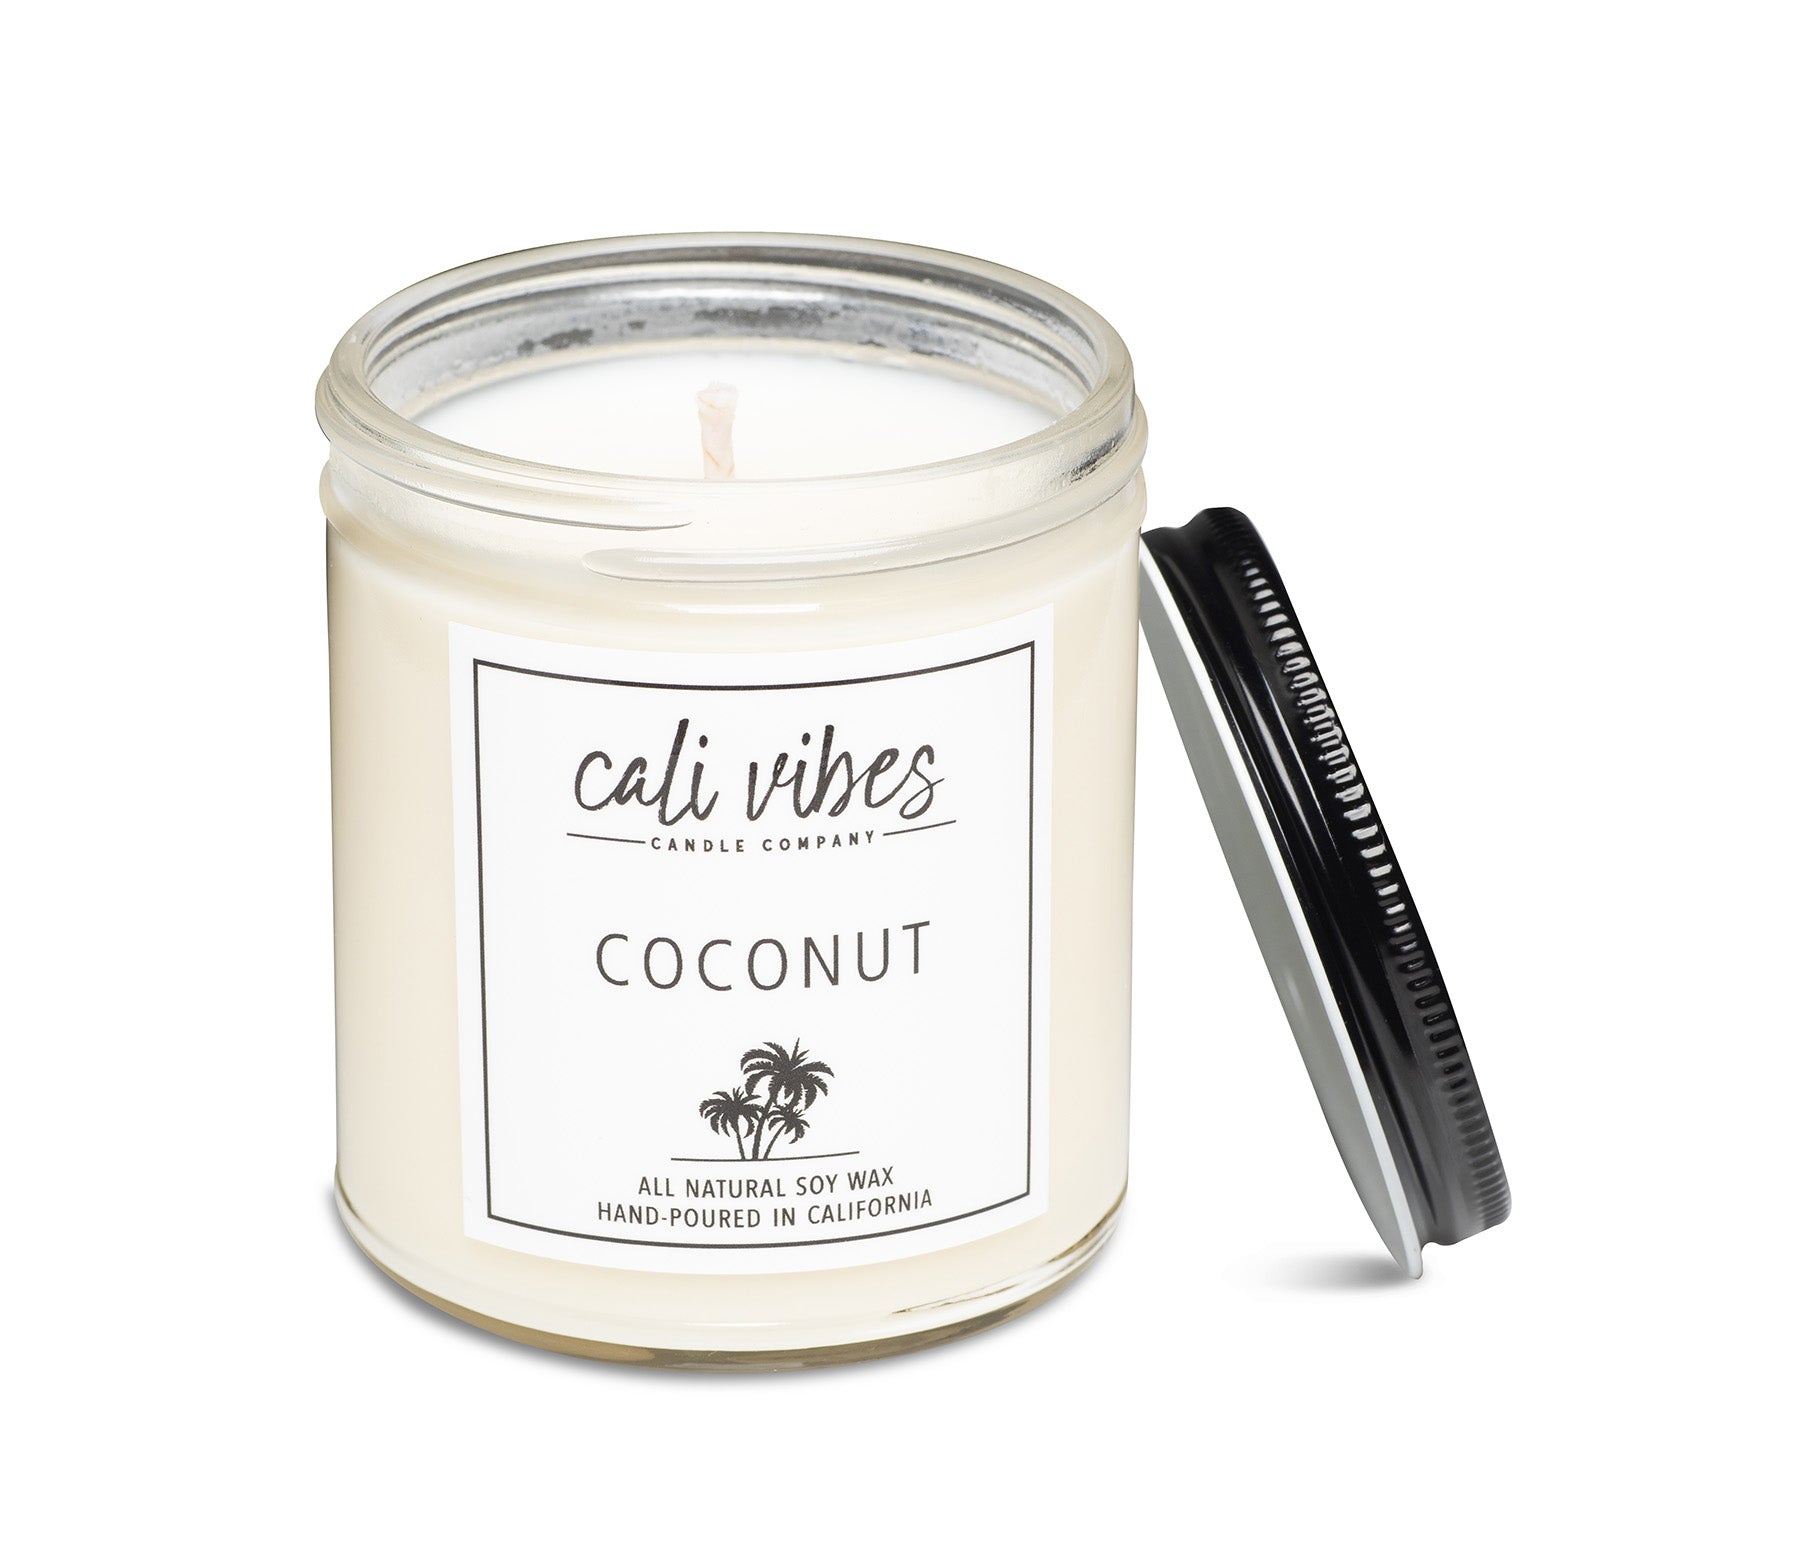 Coconut Candle: Natural Soy Wax Scented Candle – Viviana Luxury